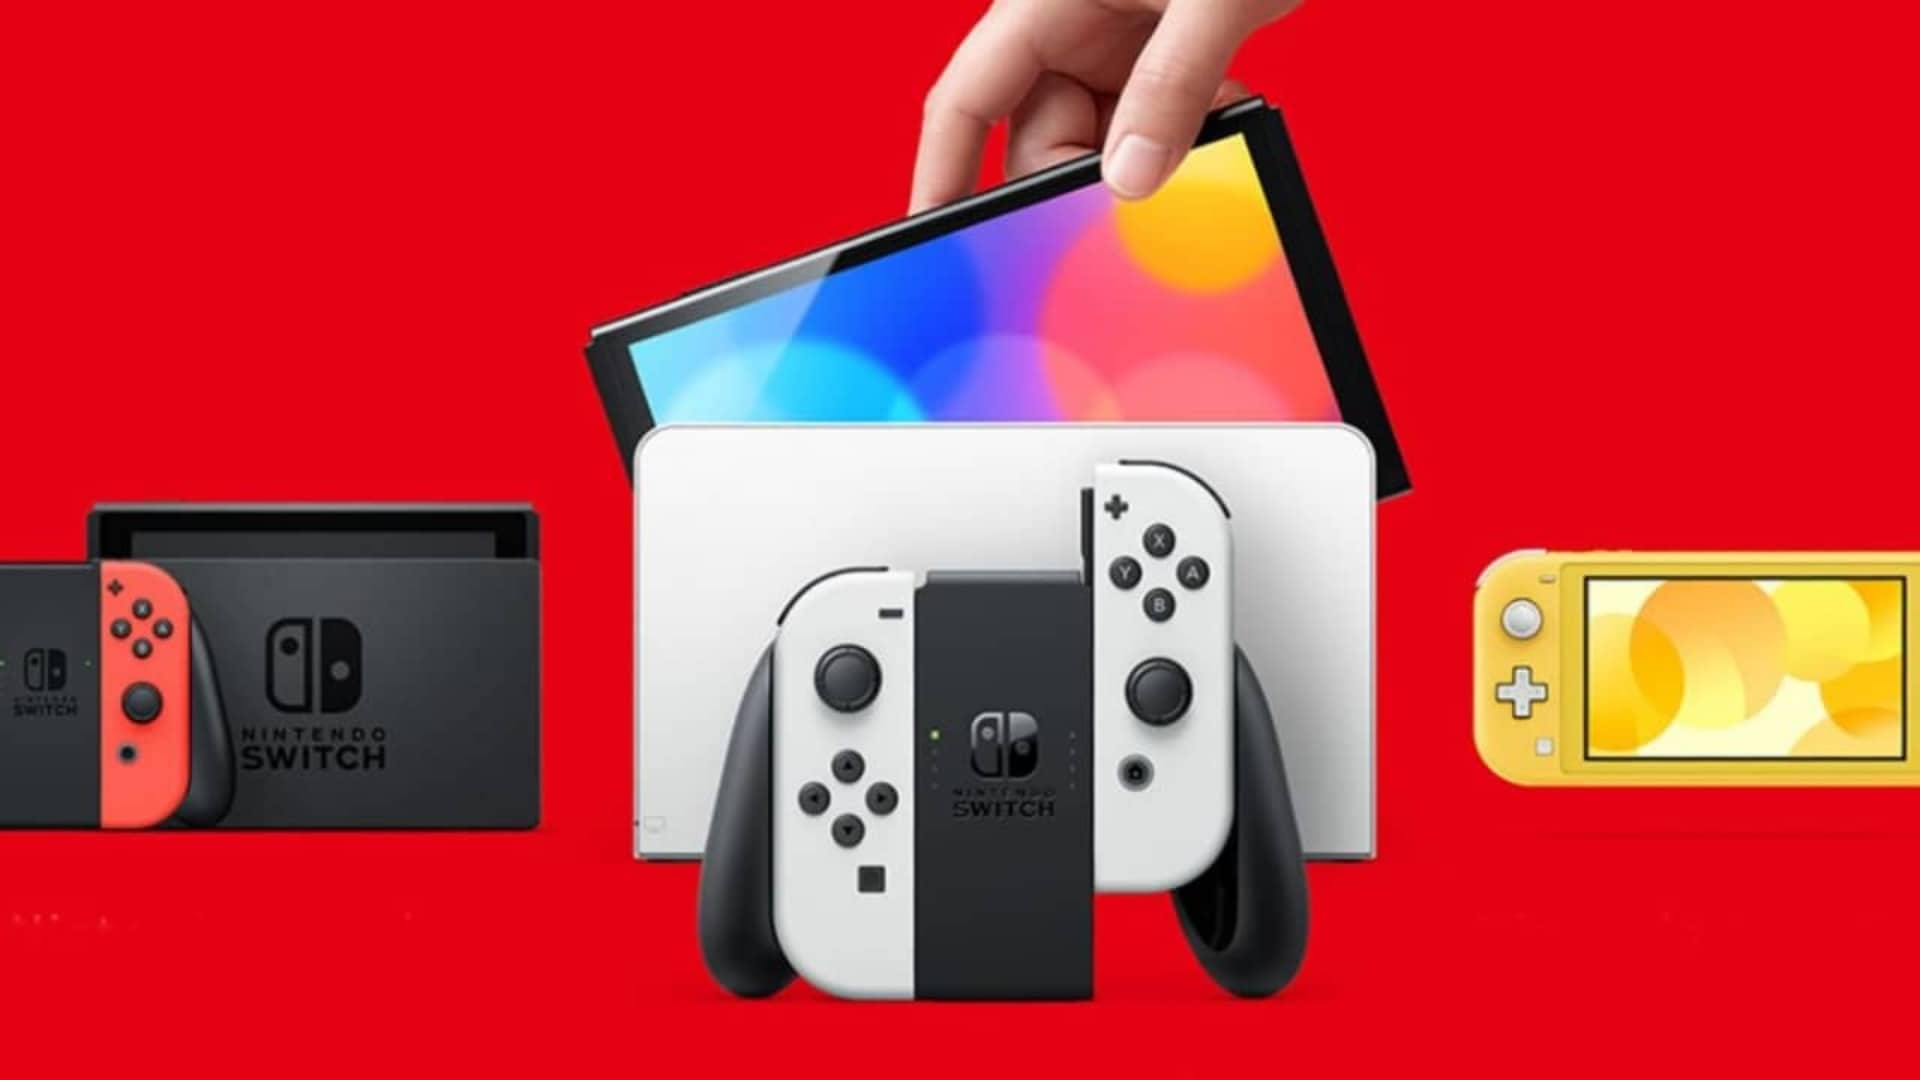 Nintendo-Switch-OLED-Specs-Compared-GamersRD-1 (1)